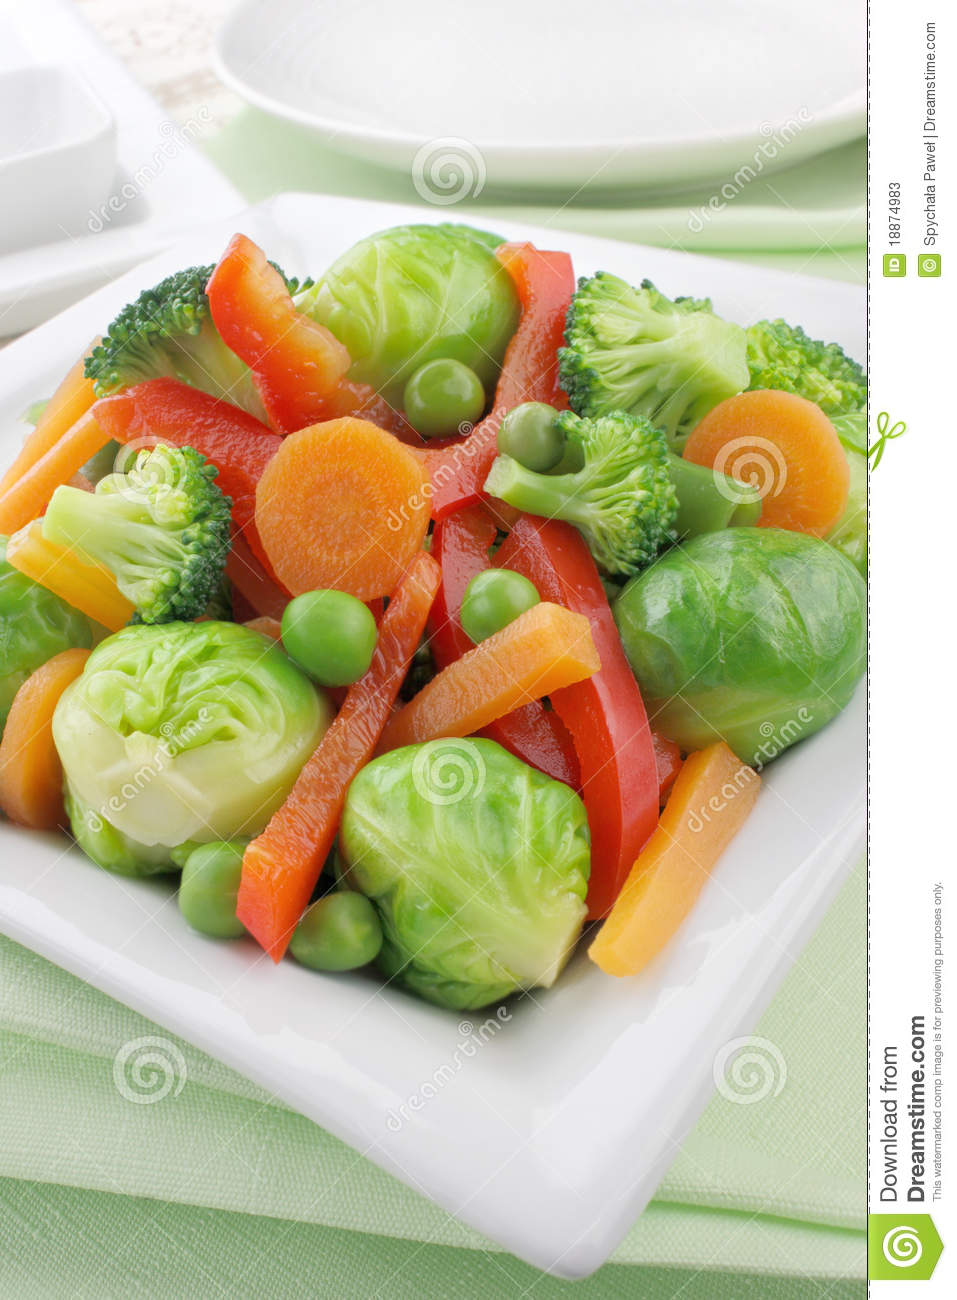 Cooked Vegetables Stock Photos   Image  18874983